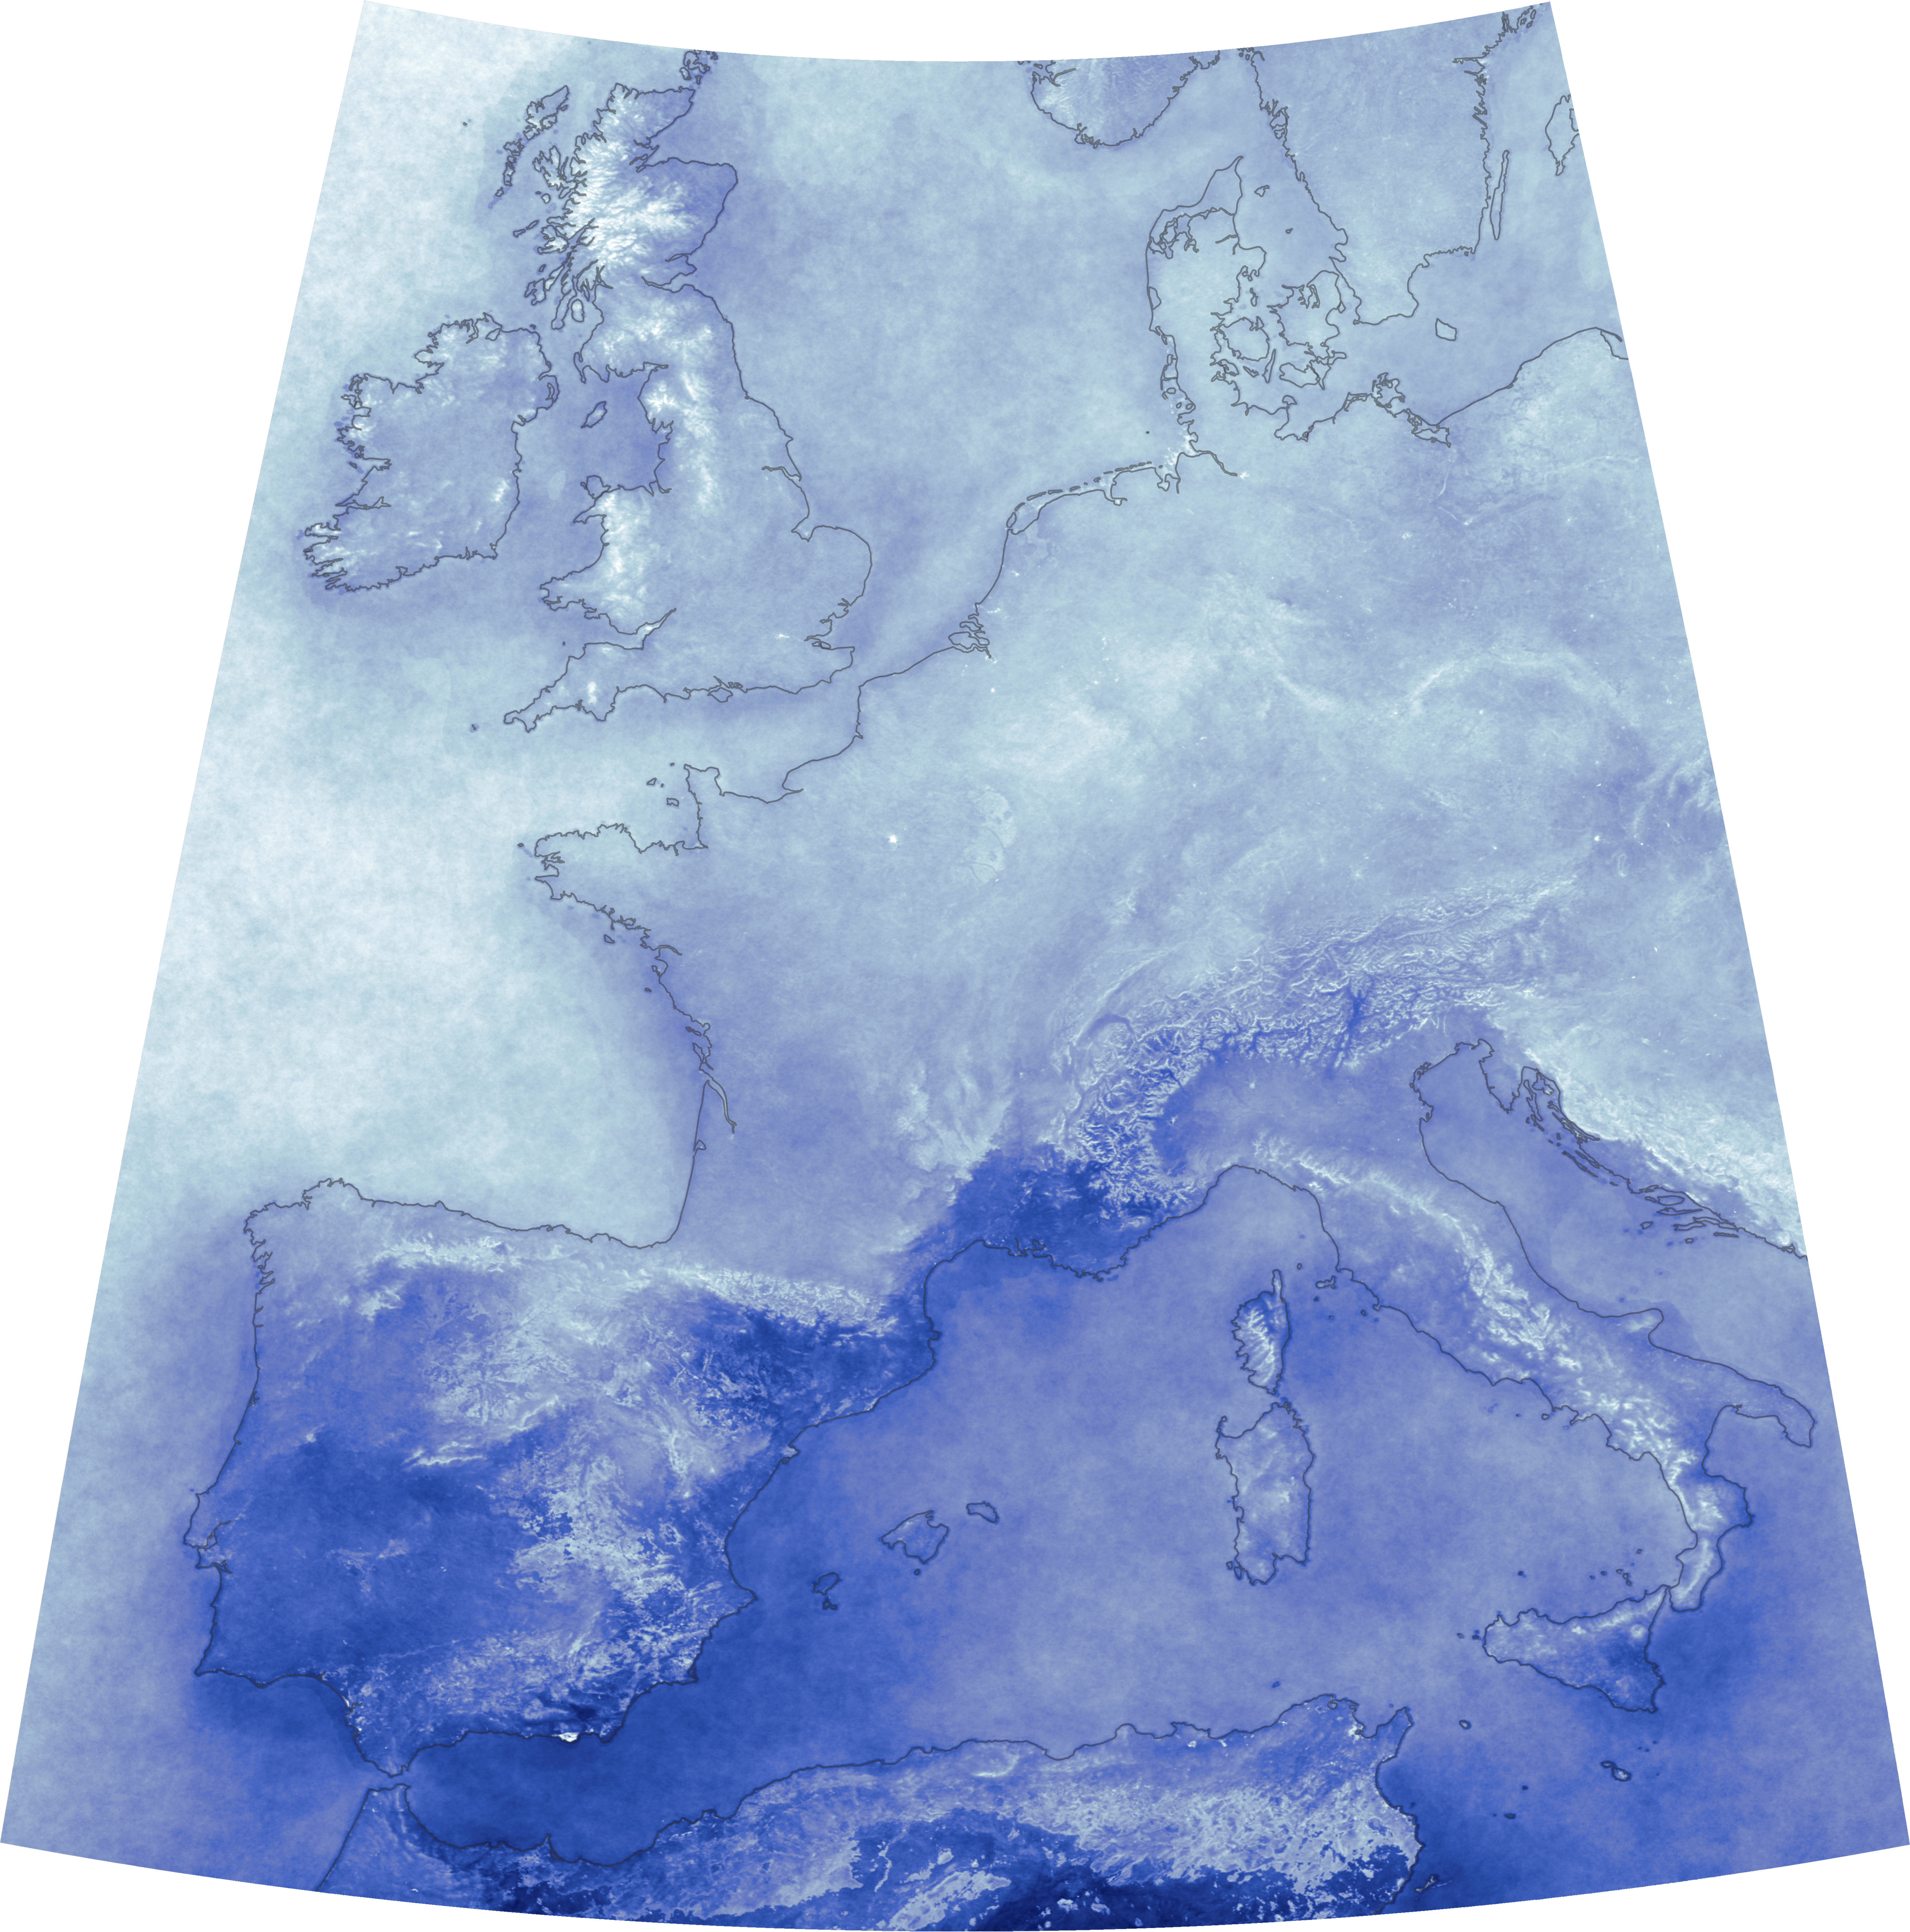 A Break in the Clouds for Europe - related image preview